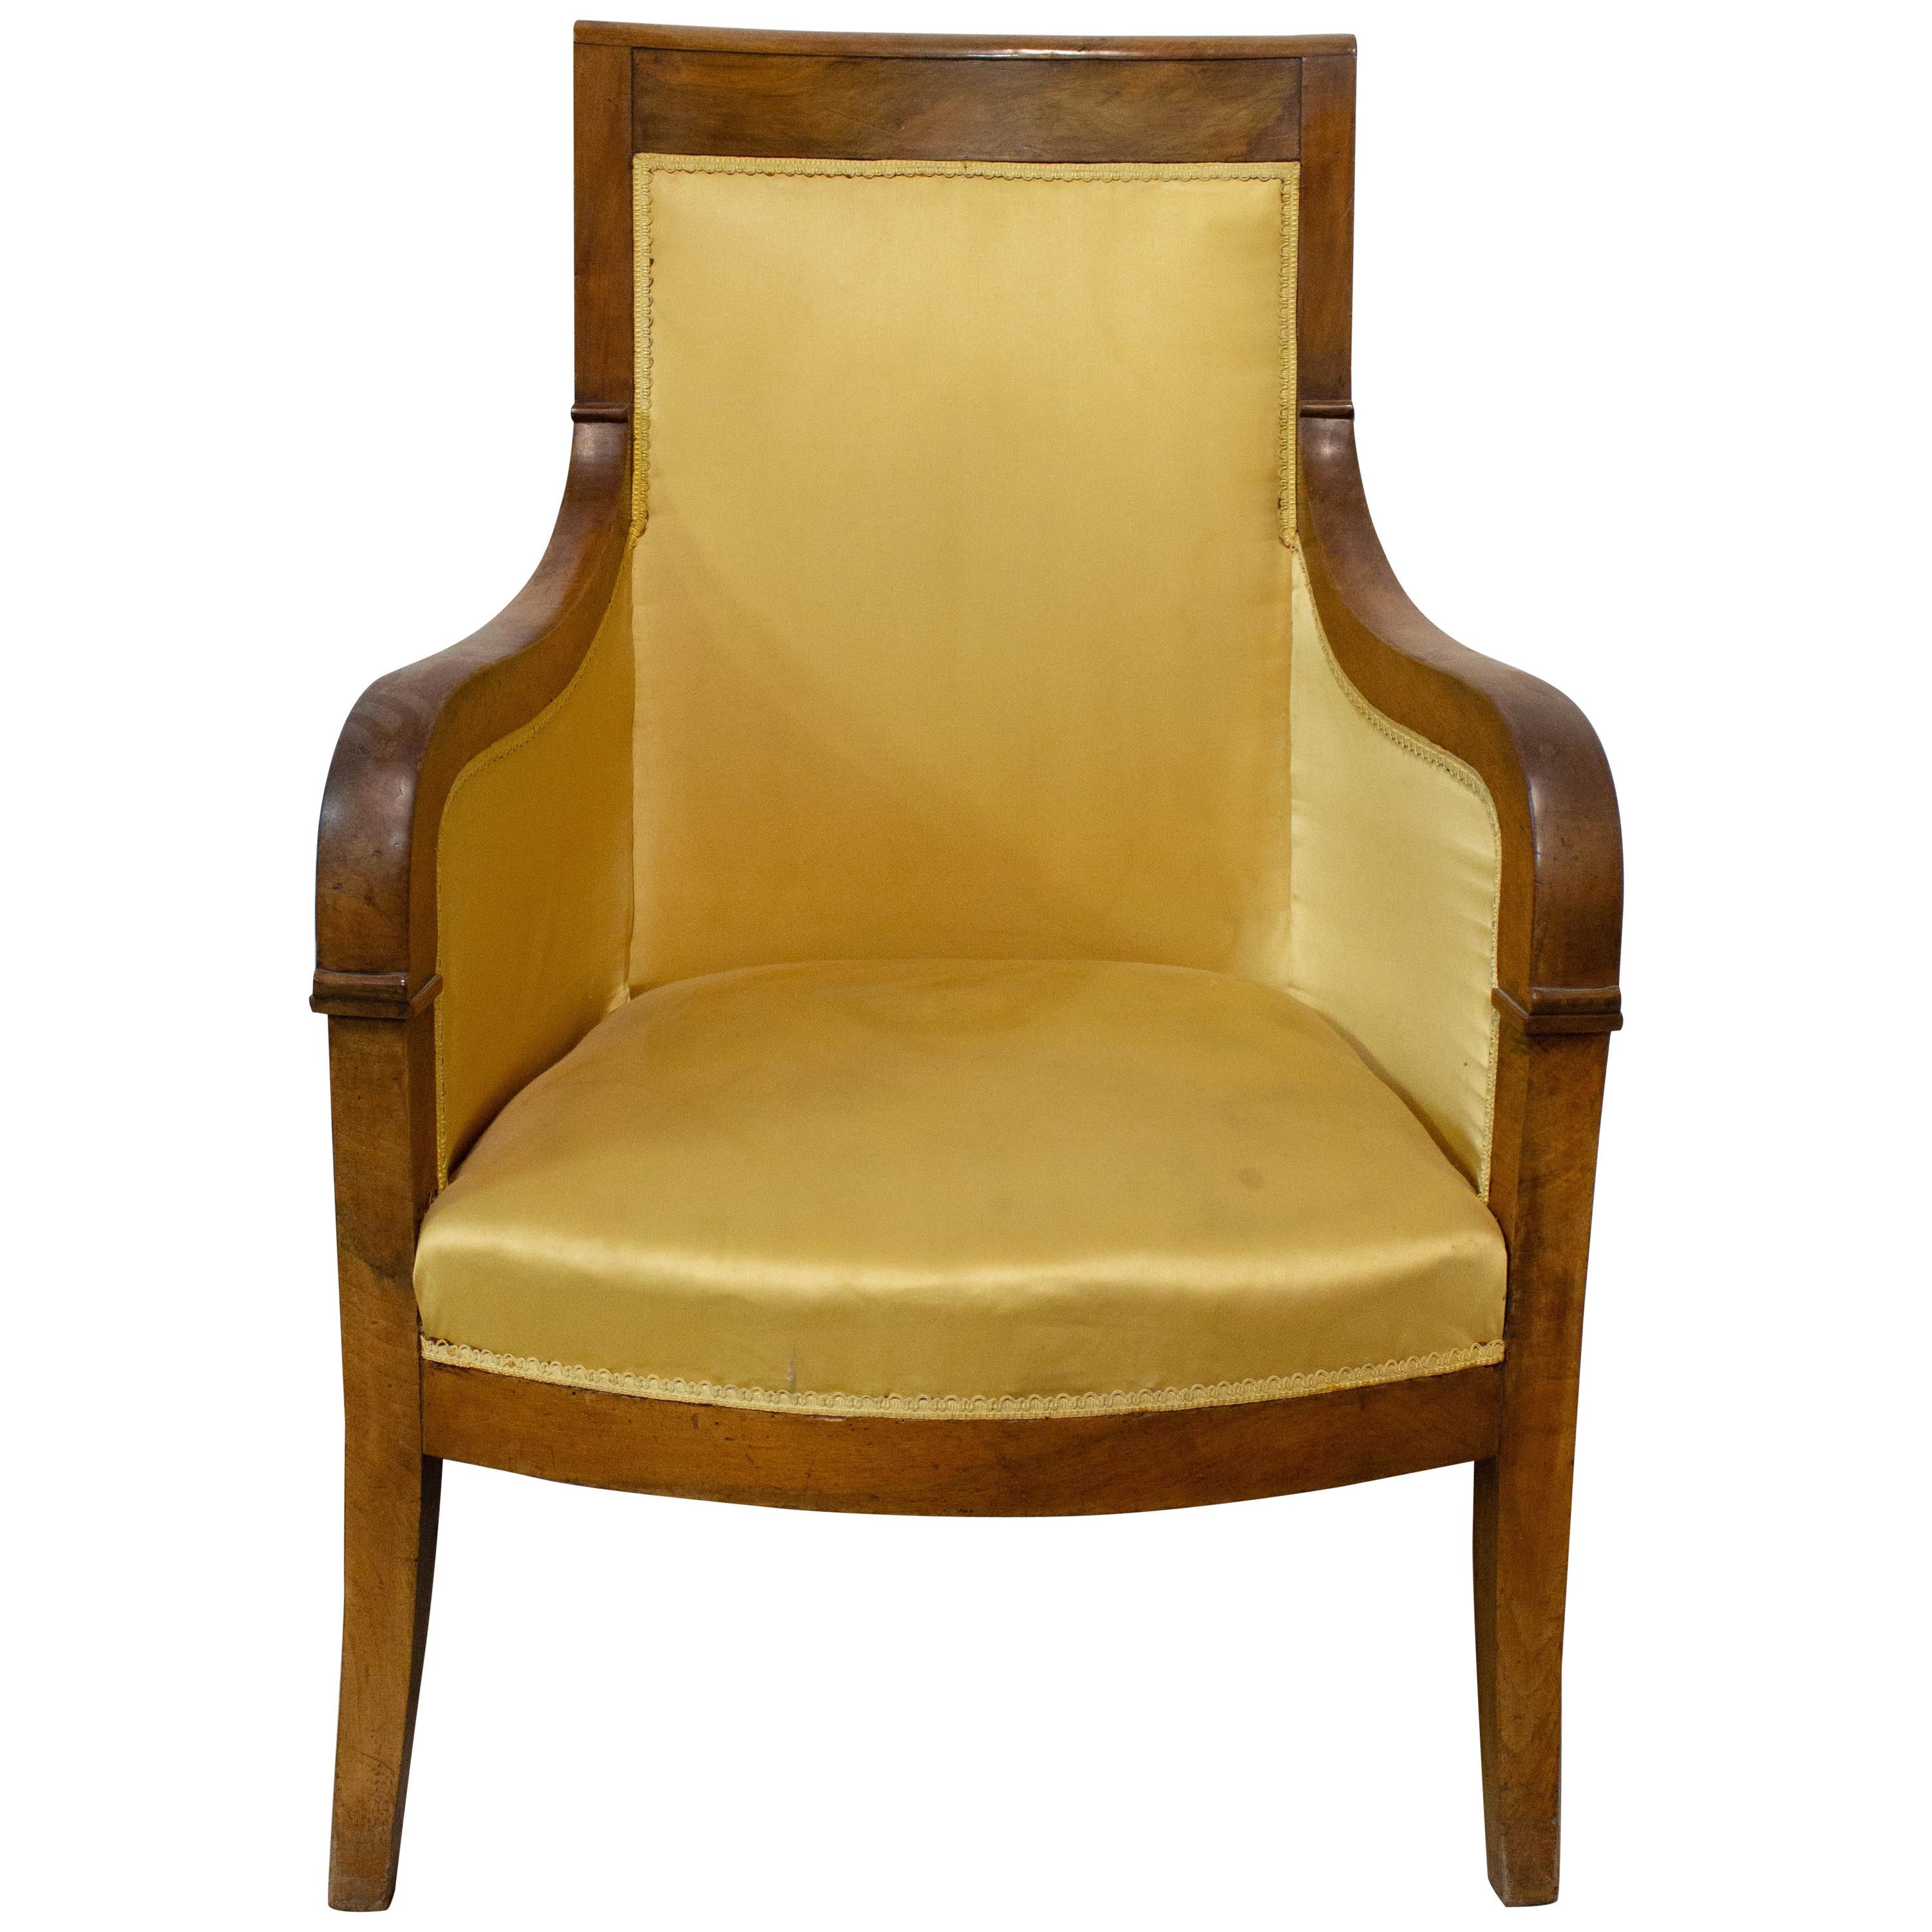 Armchair French Directoire Walnut Fauteuil, Early 19th Century